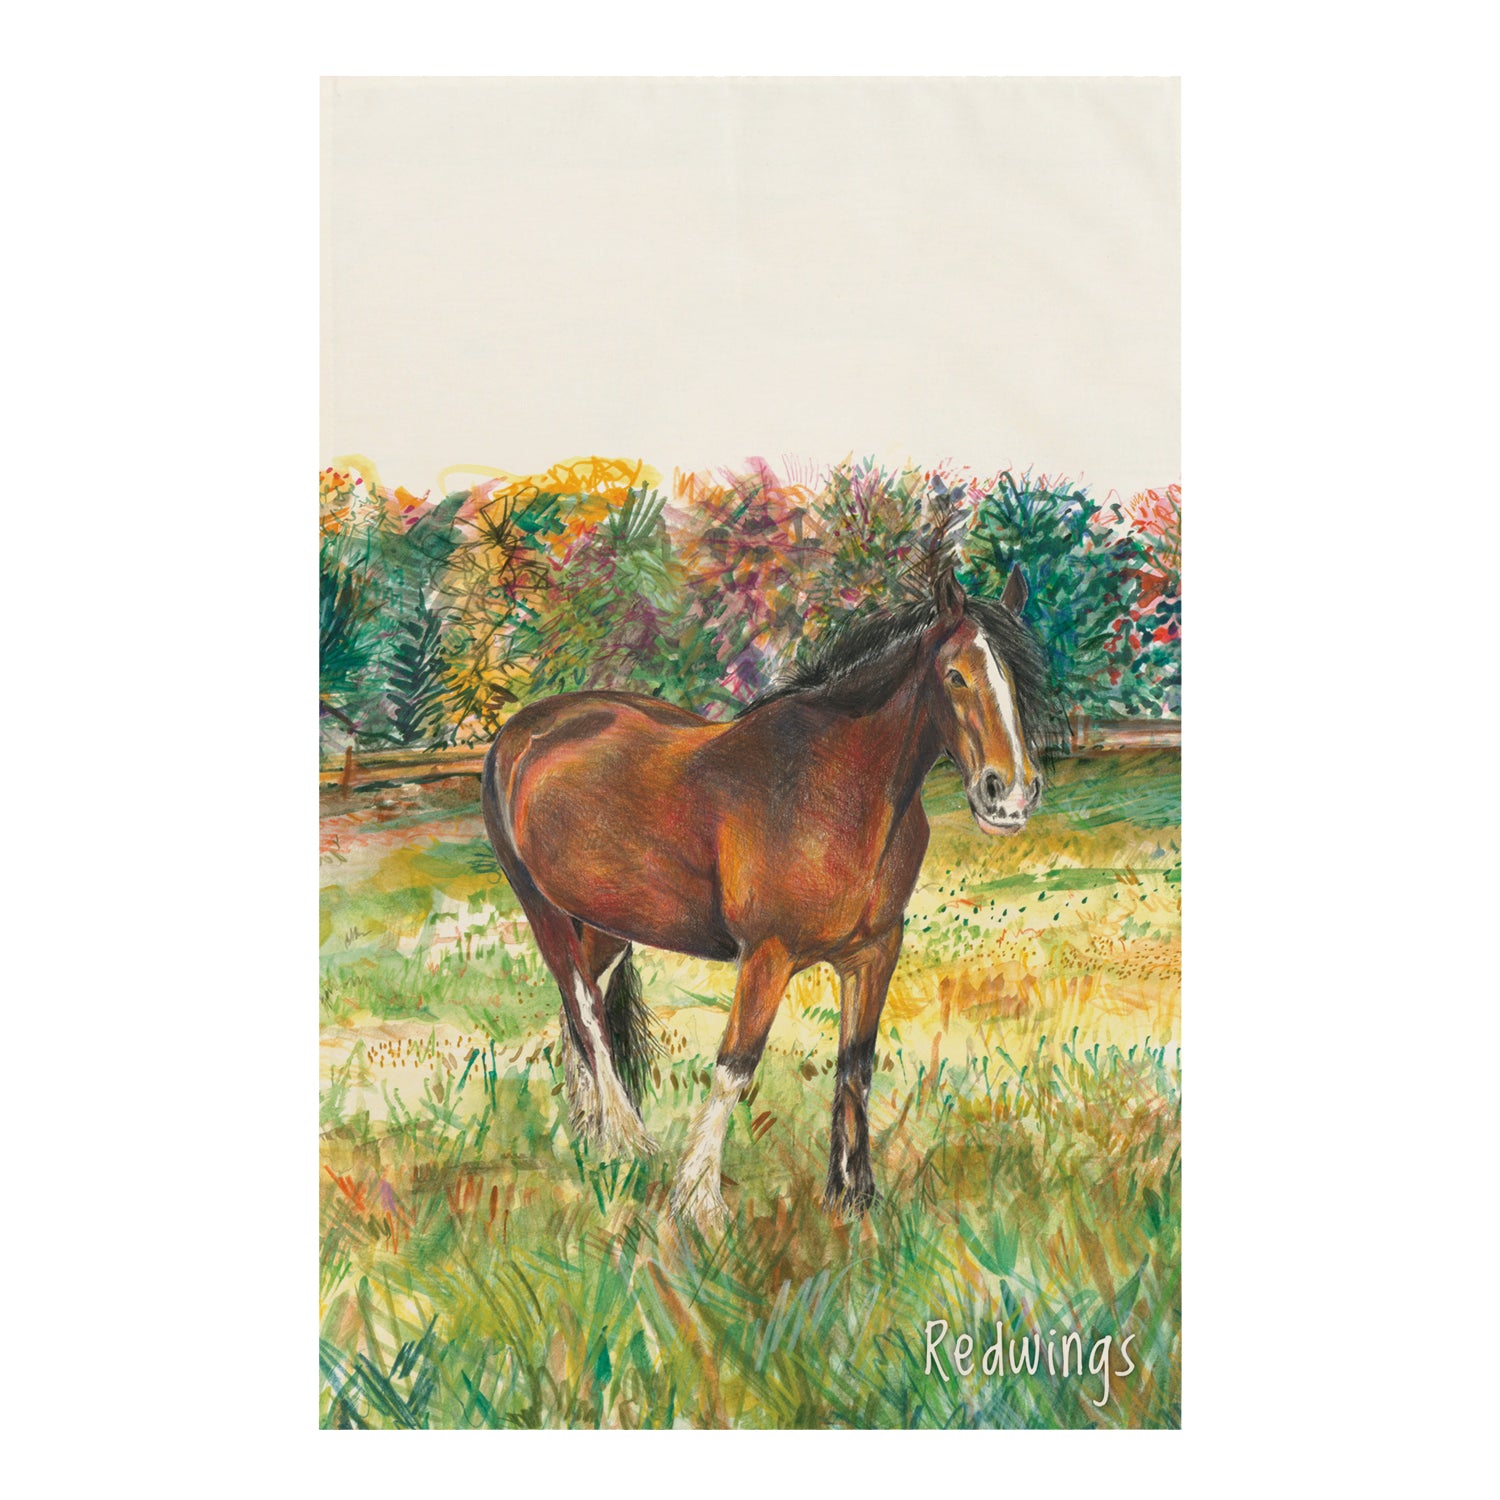 Image shows a cream tea towel with a beautiful illustration of our shire horse Lady standing in a very green field with different shades of greens throughtout the grass and trees